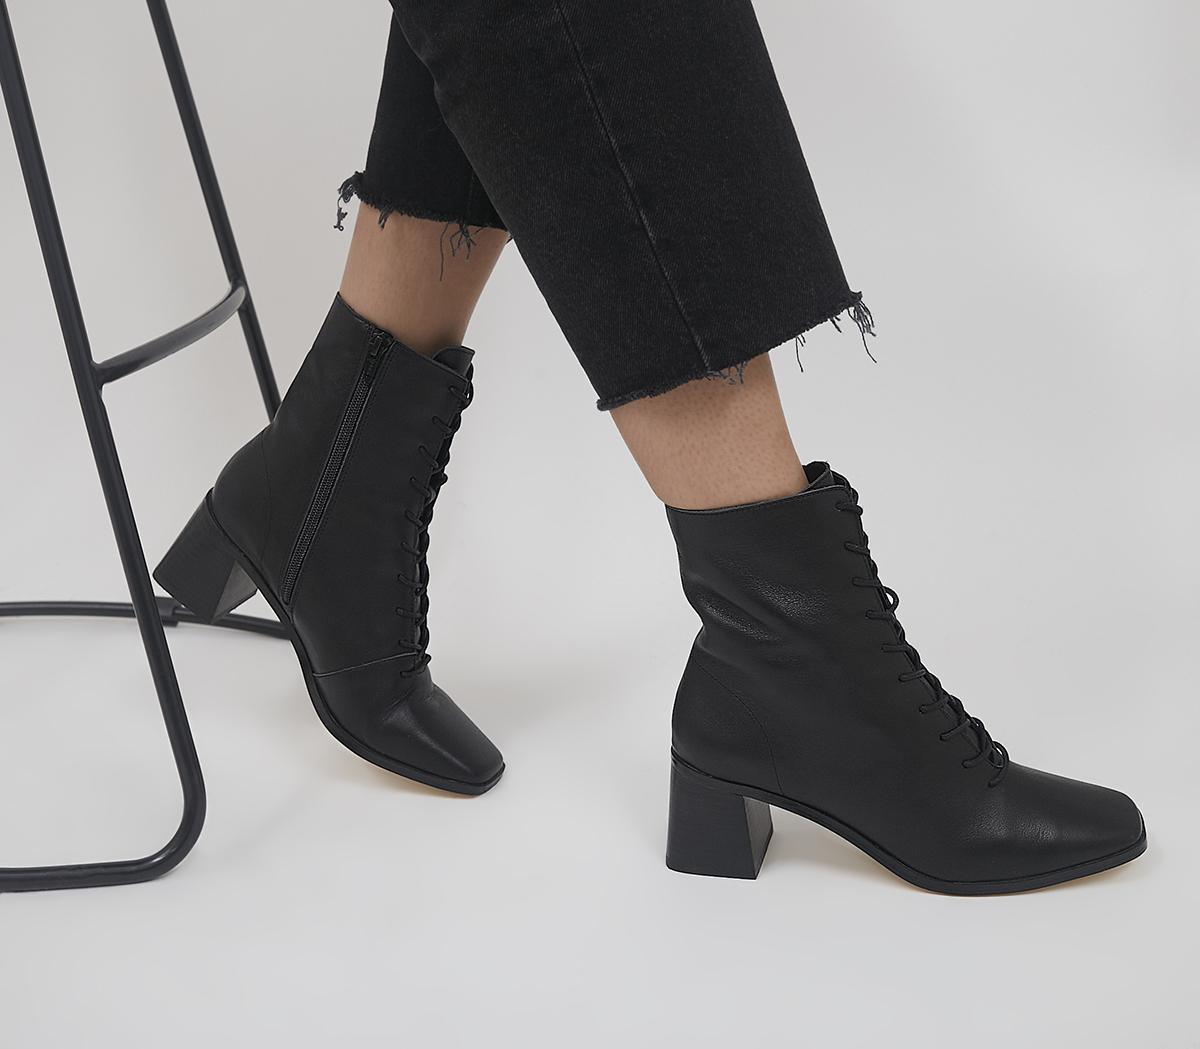 OFFICE Amaze Low Lace Up Square Toe Block Heel Ankle Boots Black ...